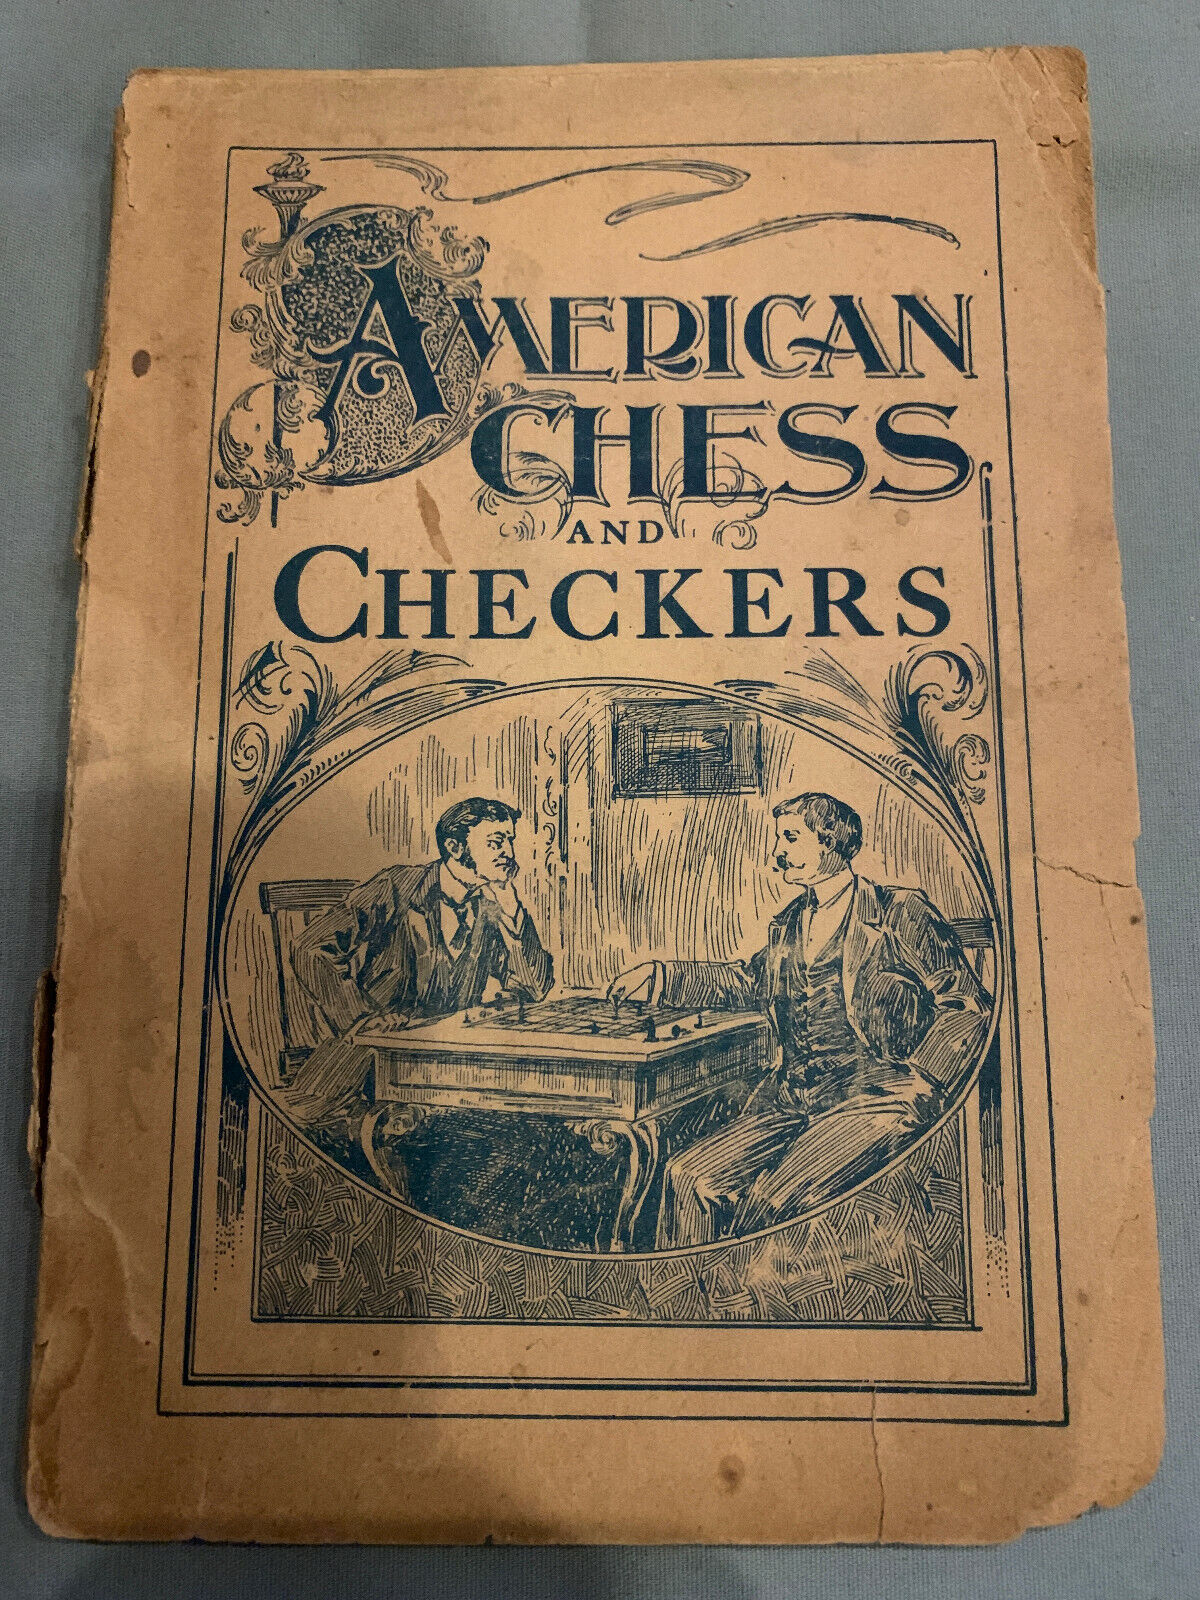 American Chess and Checkers 1880 A T B De Witt Antique SC Game Manual Book RARE